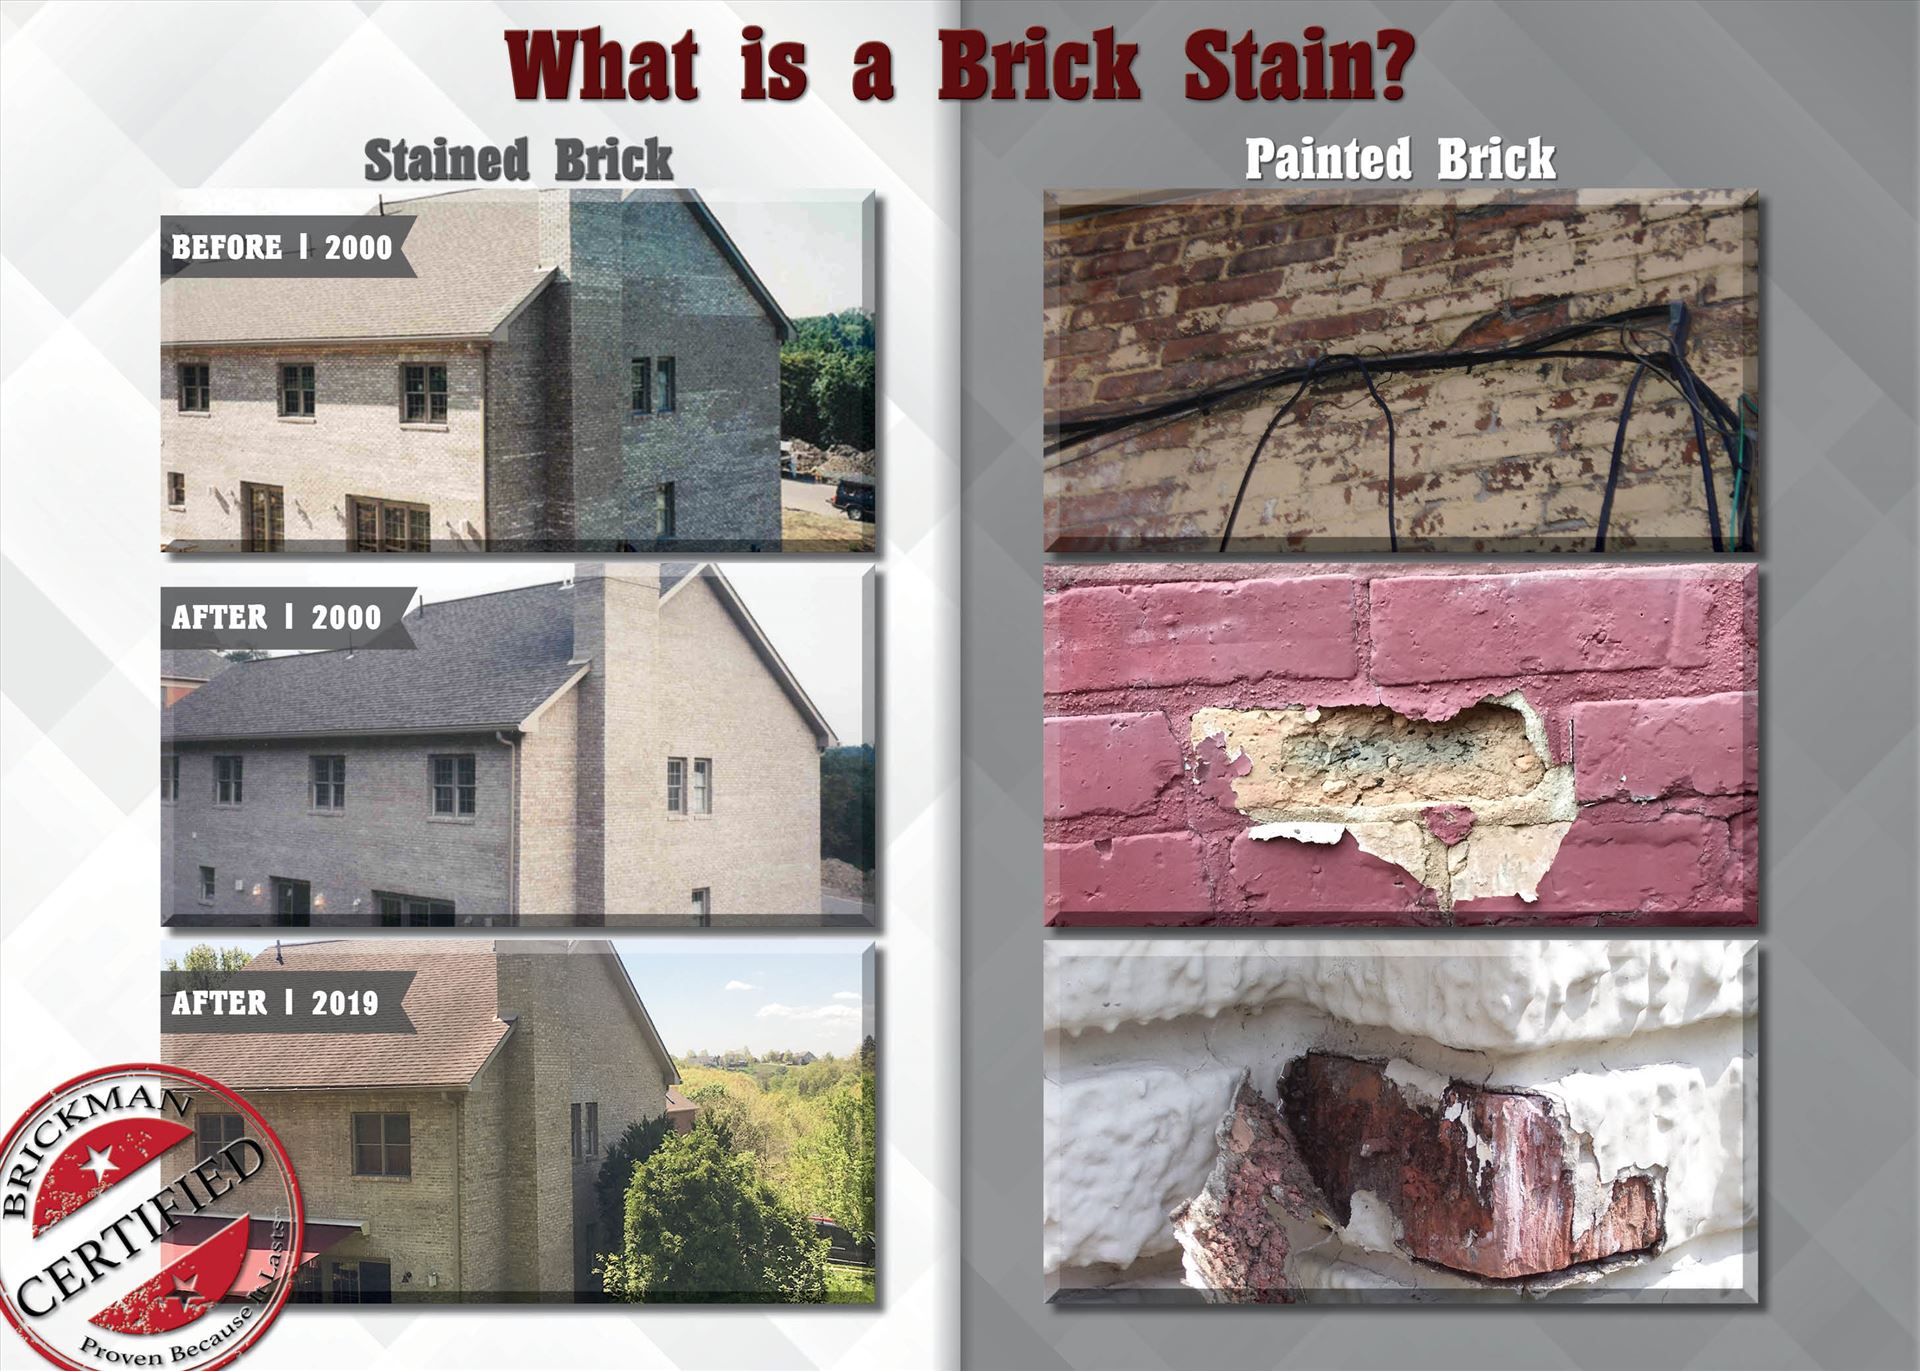 What is a Brick Stain?